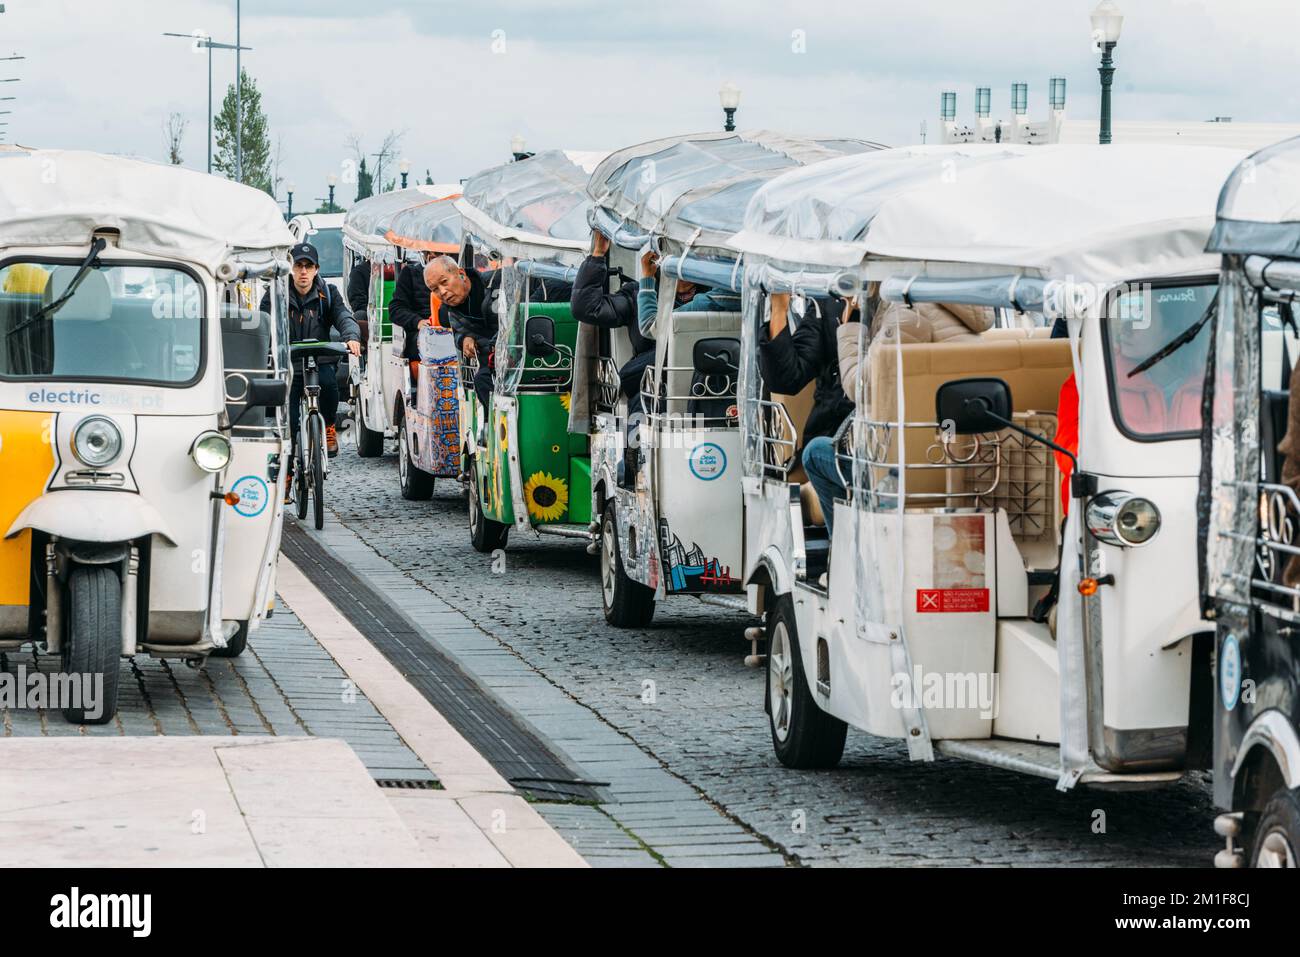 Tuk Tuk traffic in Lisbon, Portugal with many tourists waiting. These are a popular means of transport in the city Stock Photo